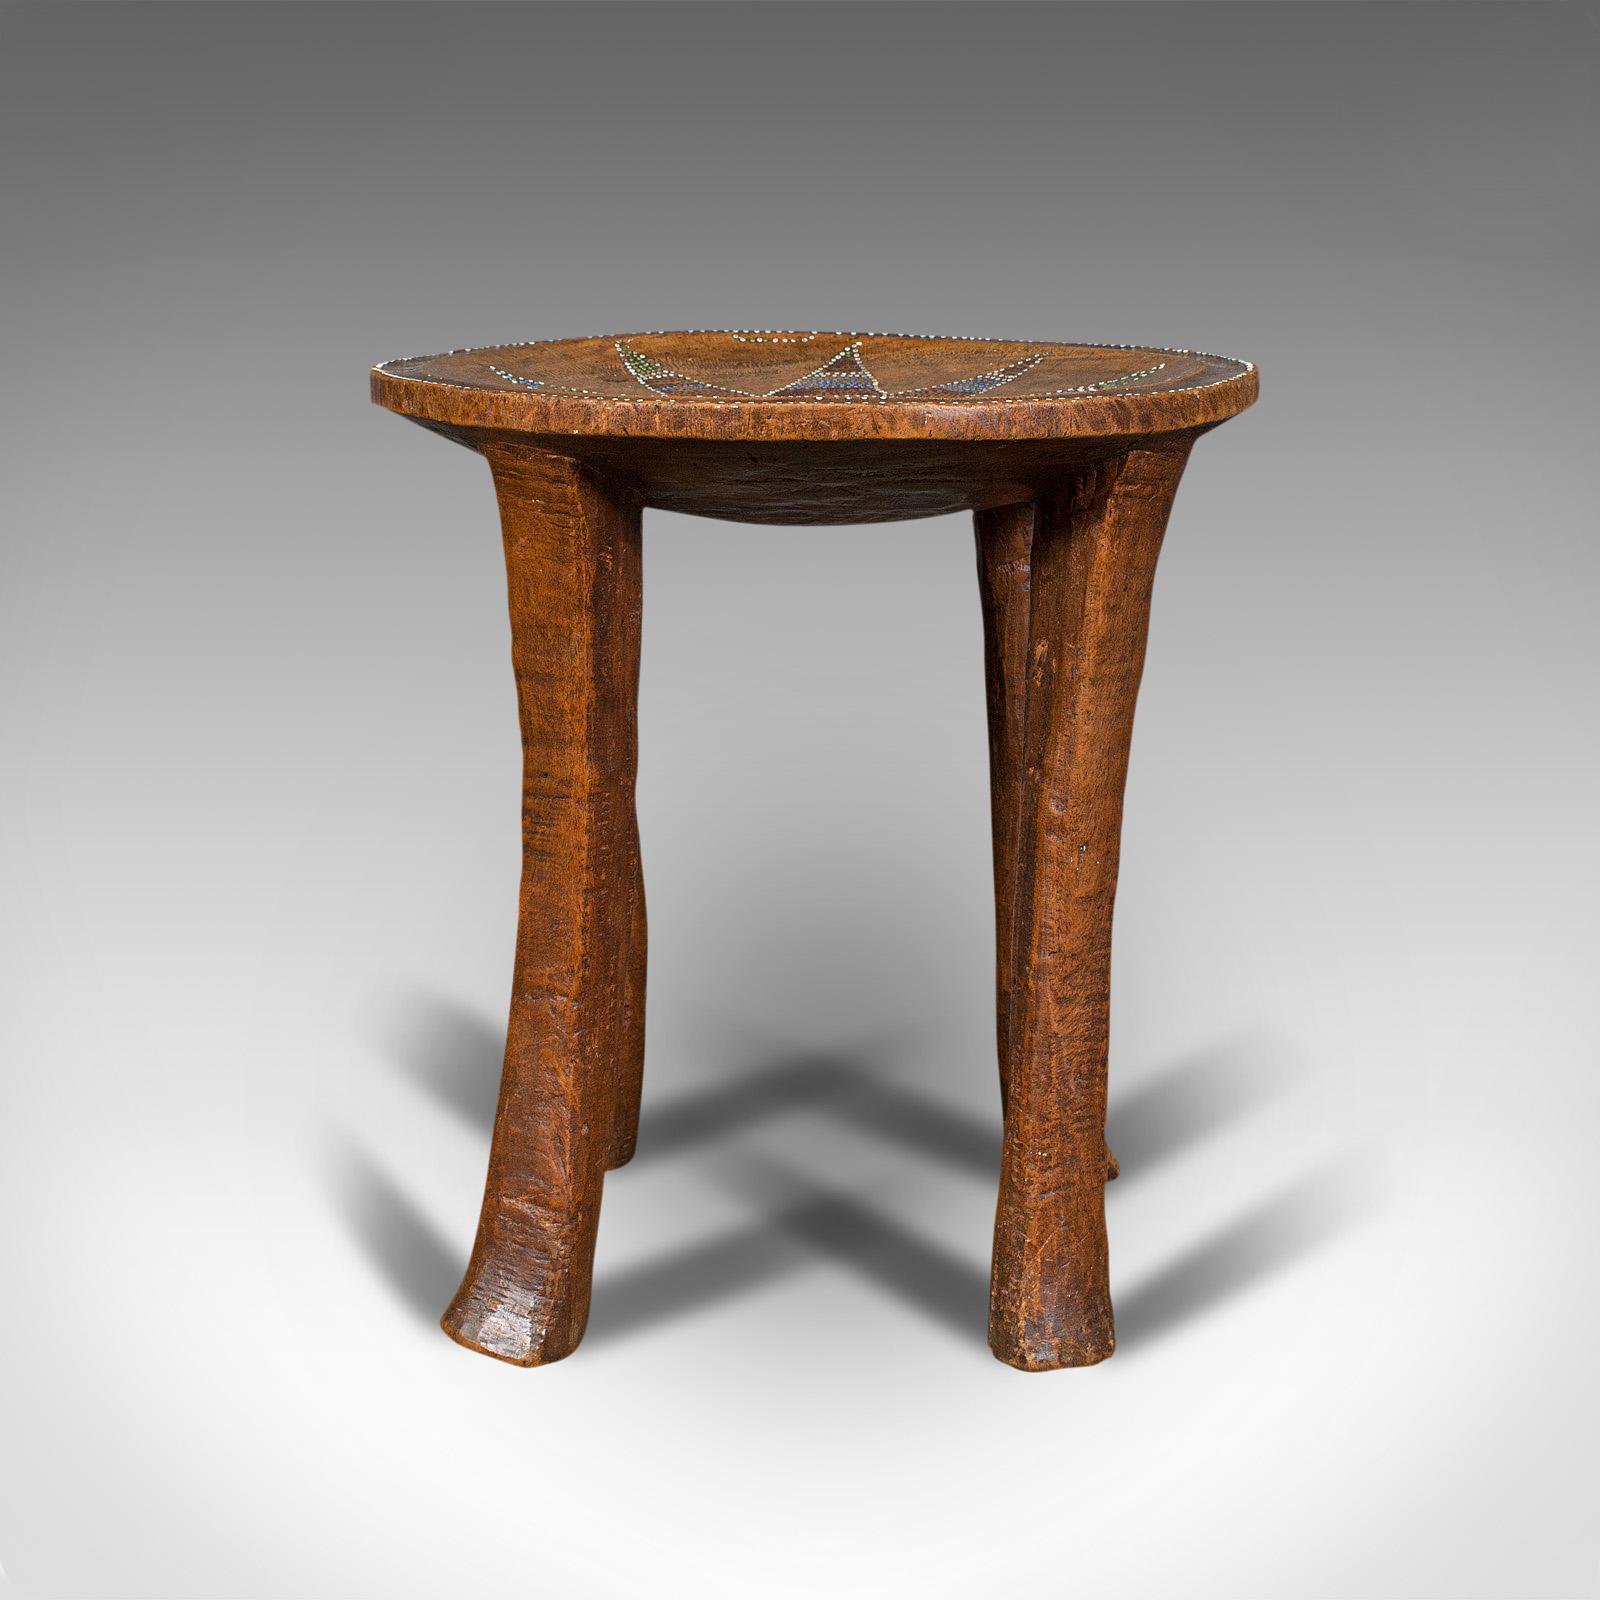 19th Century Small Antique Tribal Side Table, Australian, Lamp, Stool, Late Victorian, C.1900